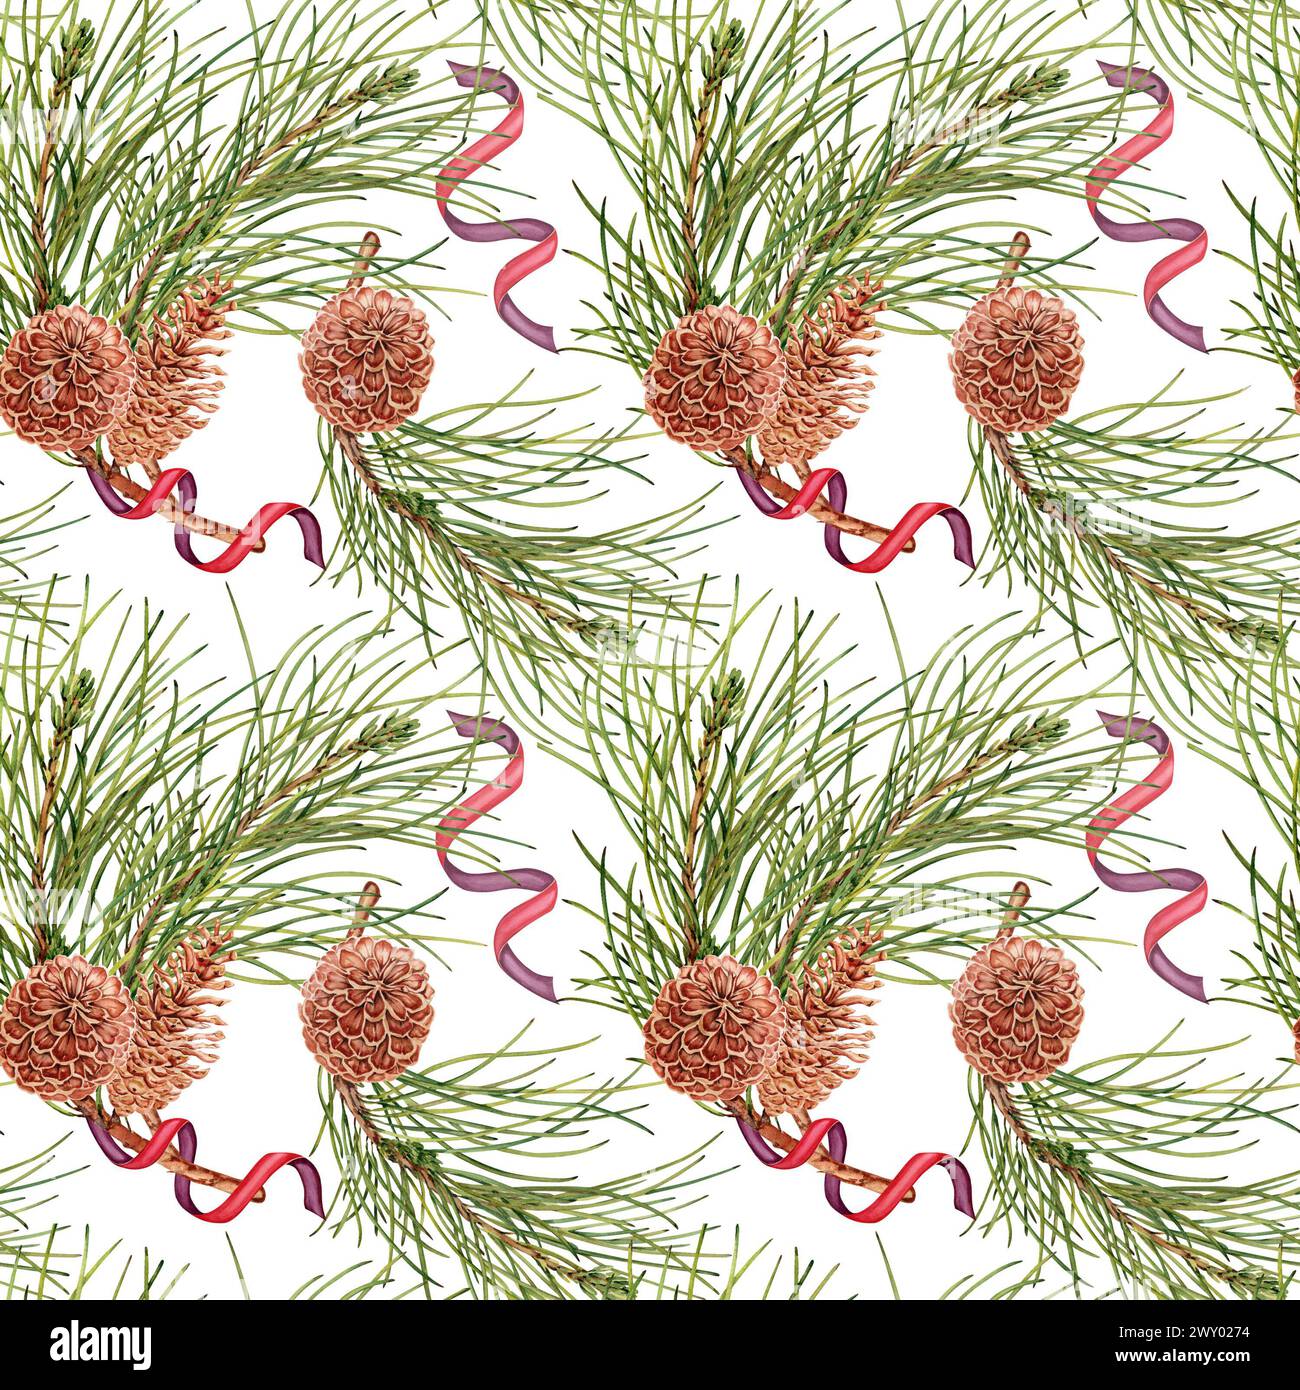 Pine cones on pine tree branches decorated with ribbons. Seamless pattern watercolor illustration on white background. Christmas repeatable background Stock Photo